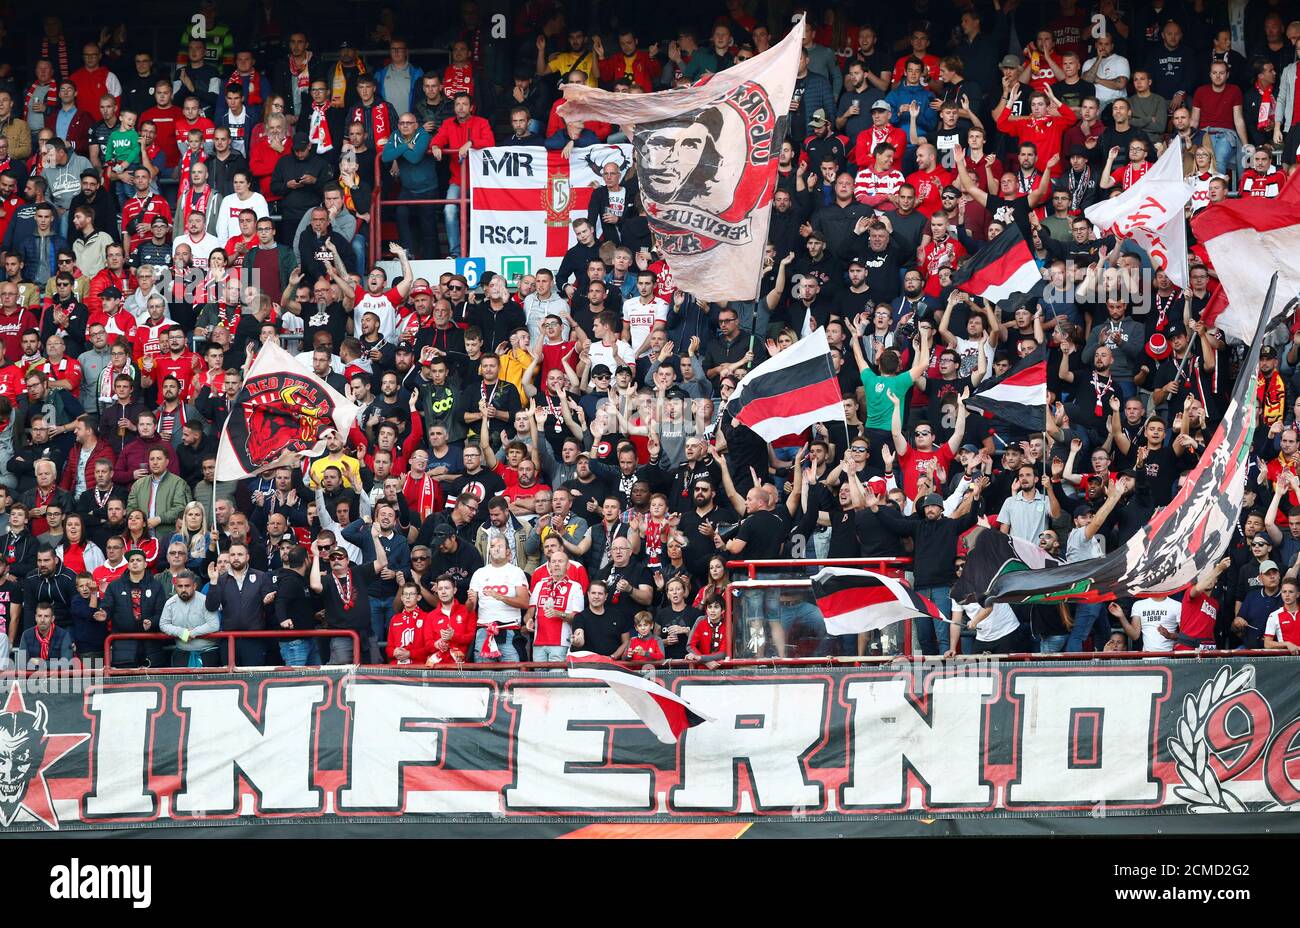 Standard Liege Fans High Resolution Stock Photography and Images - Alamy